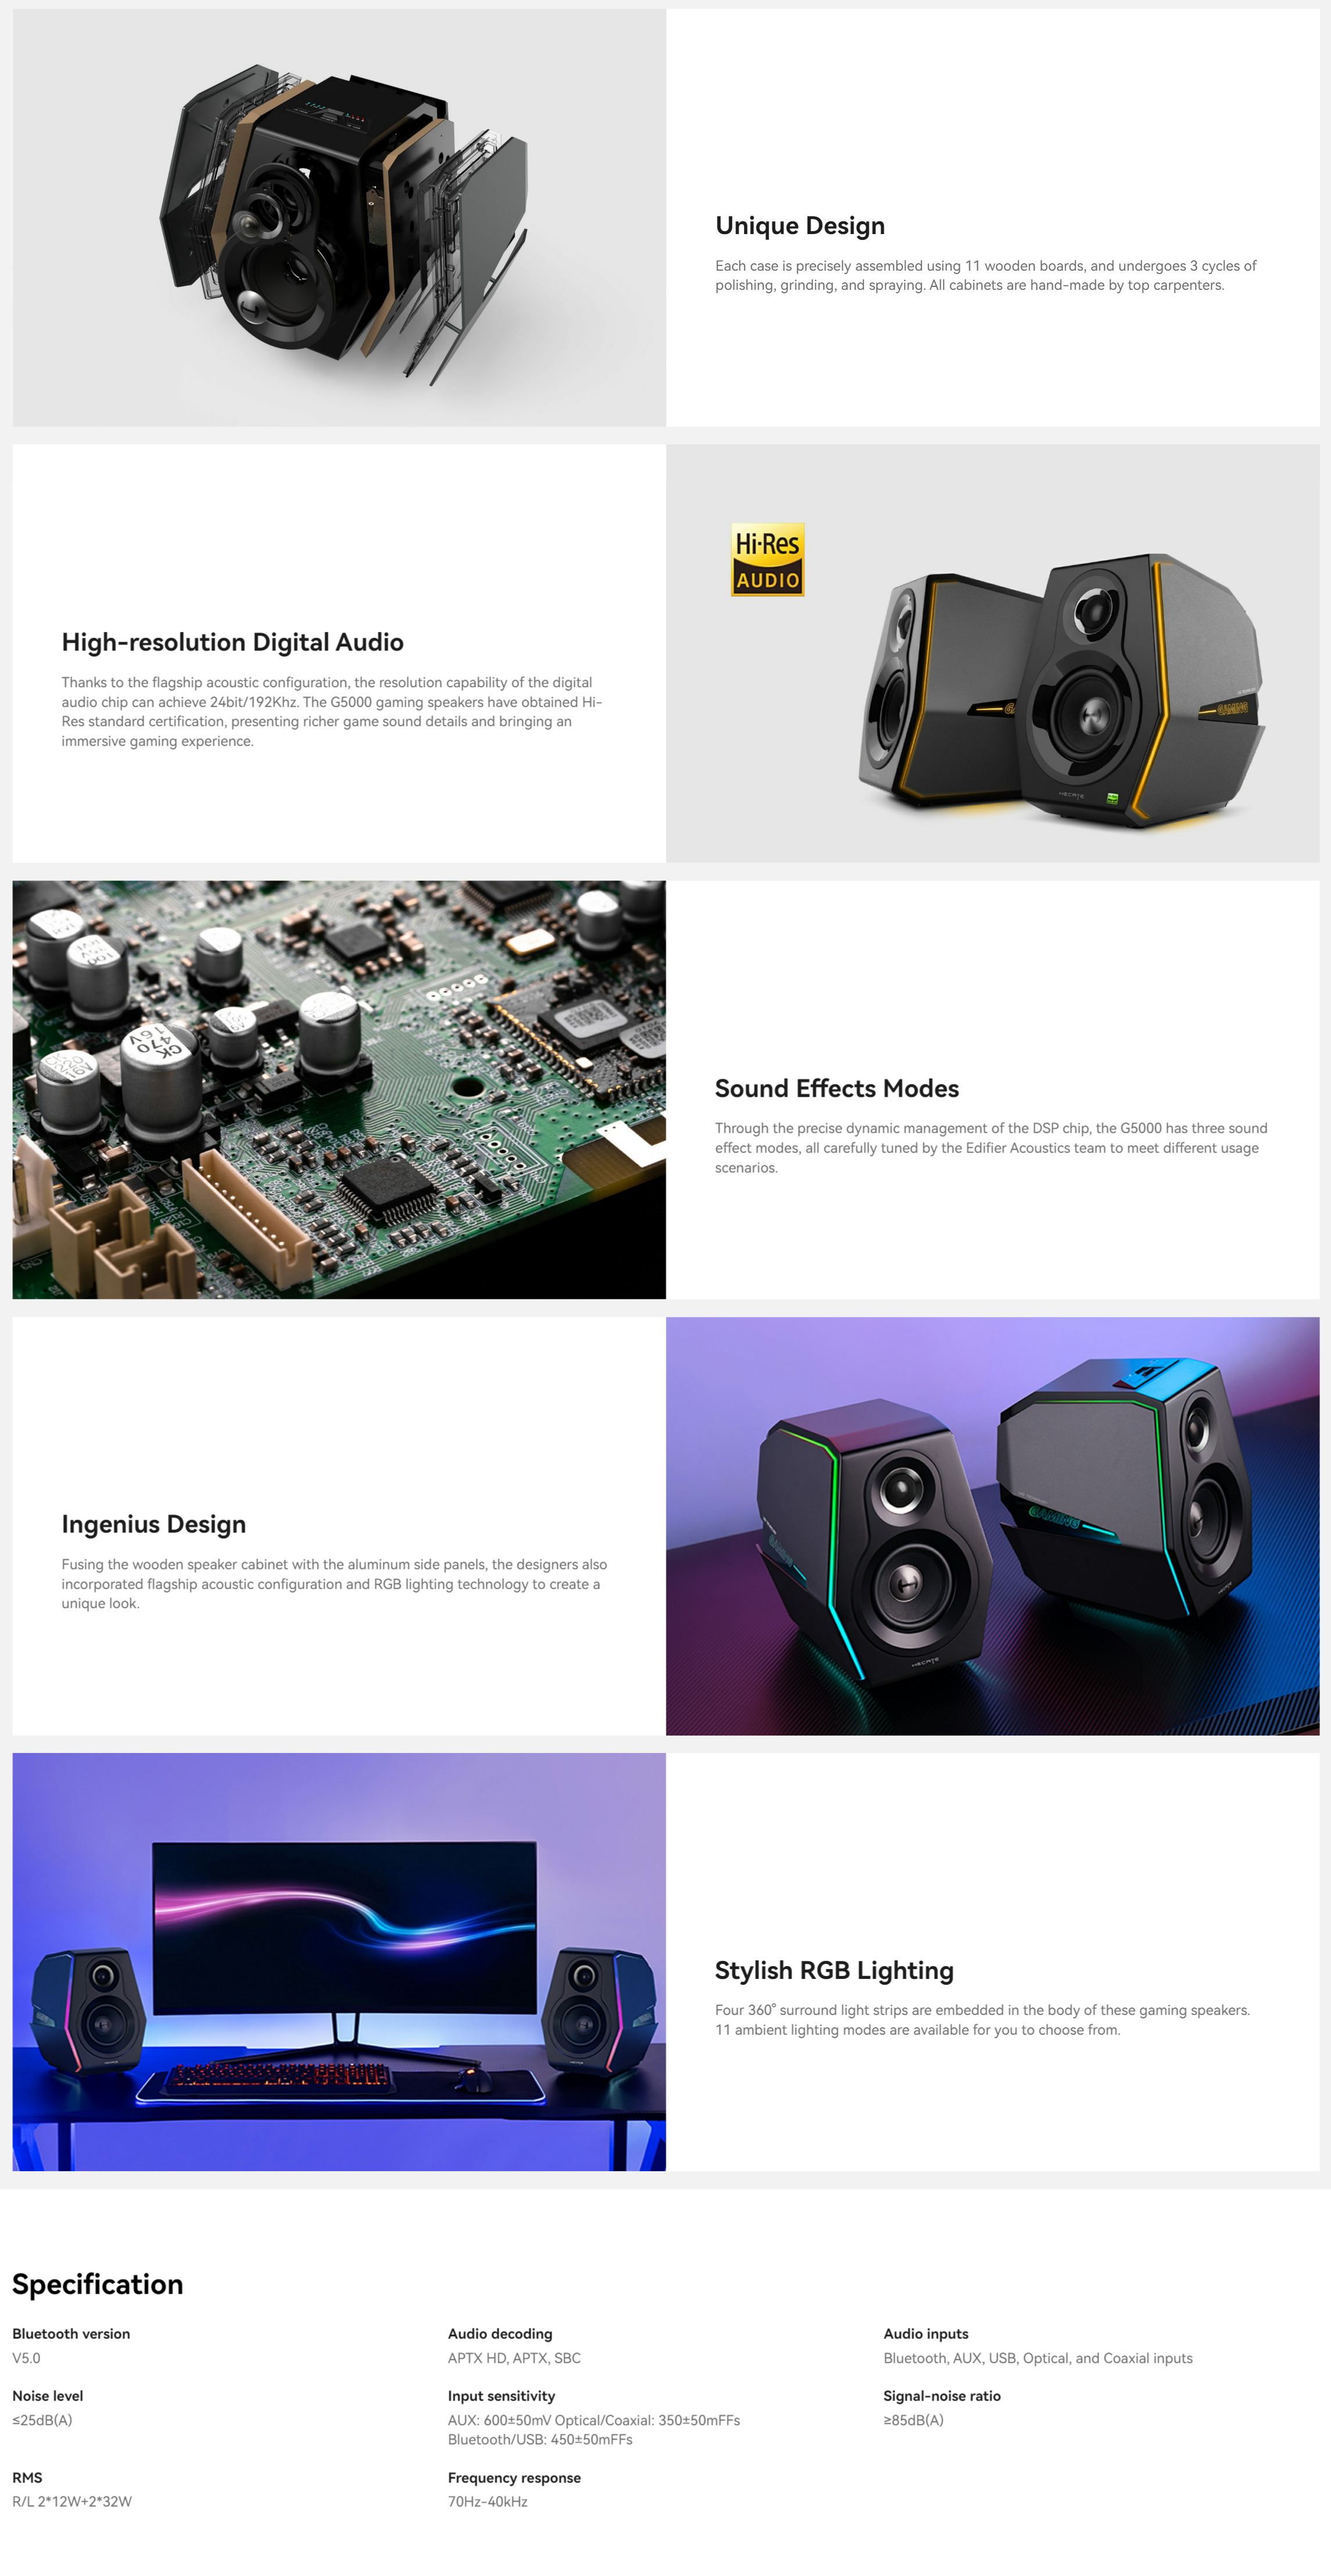 A large marketing image providing additional information about the product Edifier Hecate G5000 - Bluetooth Gaming Speakers - Additional alt info not provided